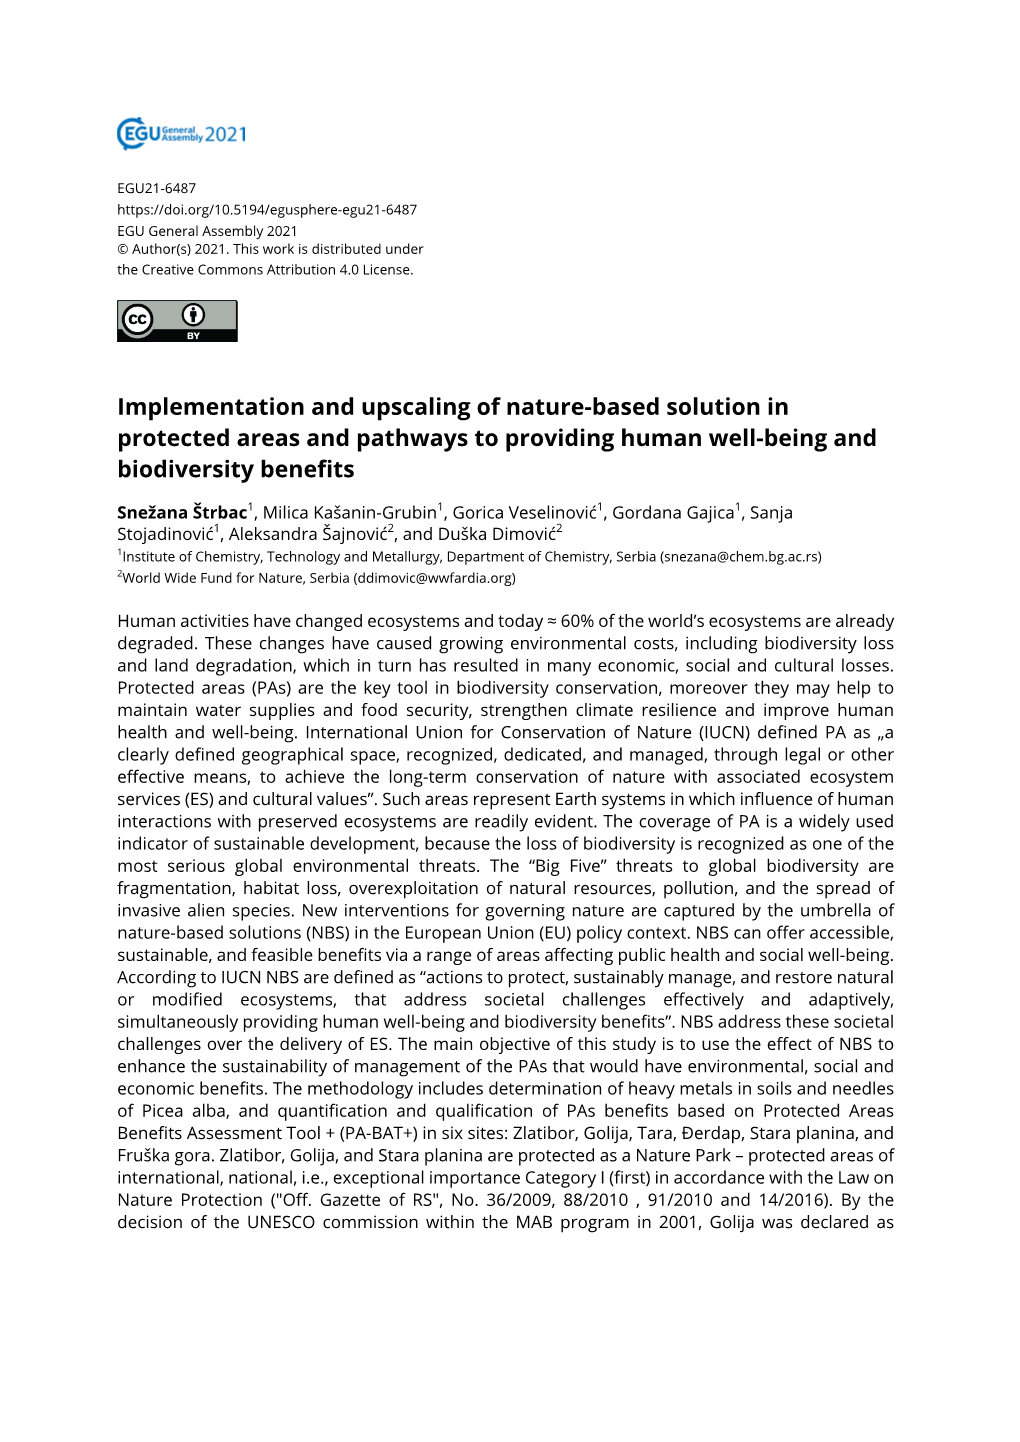 Implementation and Upscaling of Nature-Based Solution in Protected Areas and Pathways to Providing Human Well-Being and Biodiversity Benefits